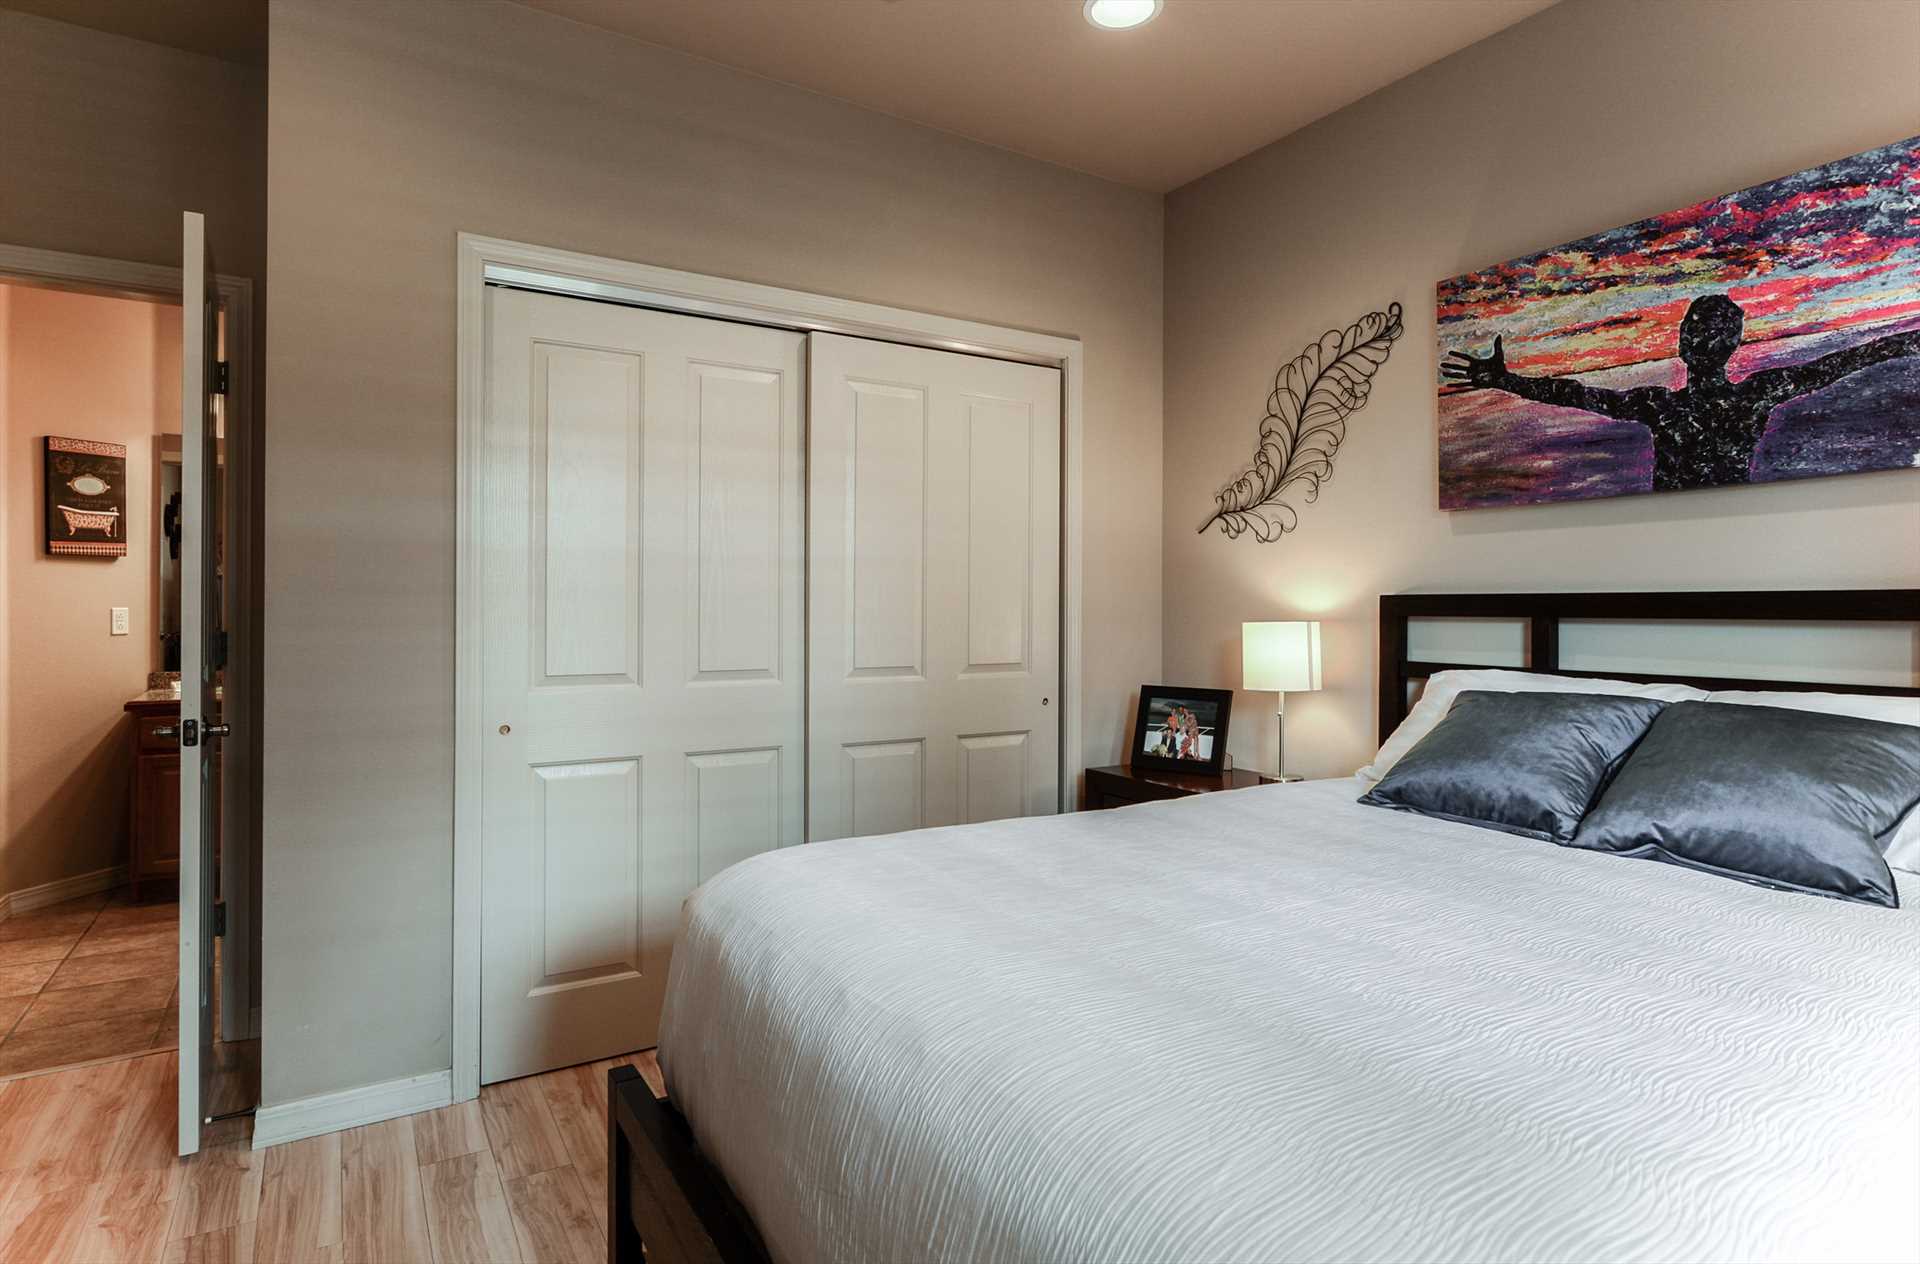 Unique art and a large closet complete this bedroom.